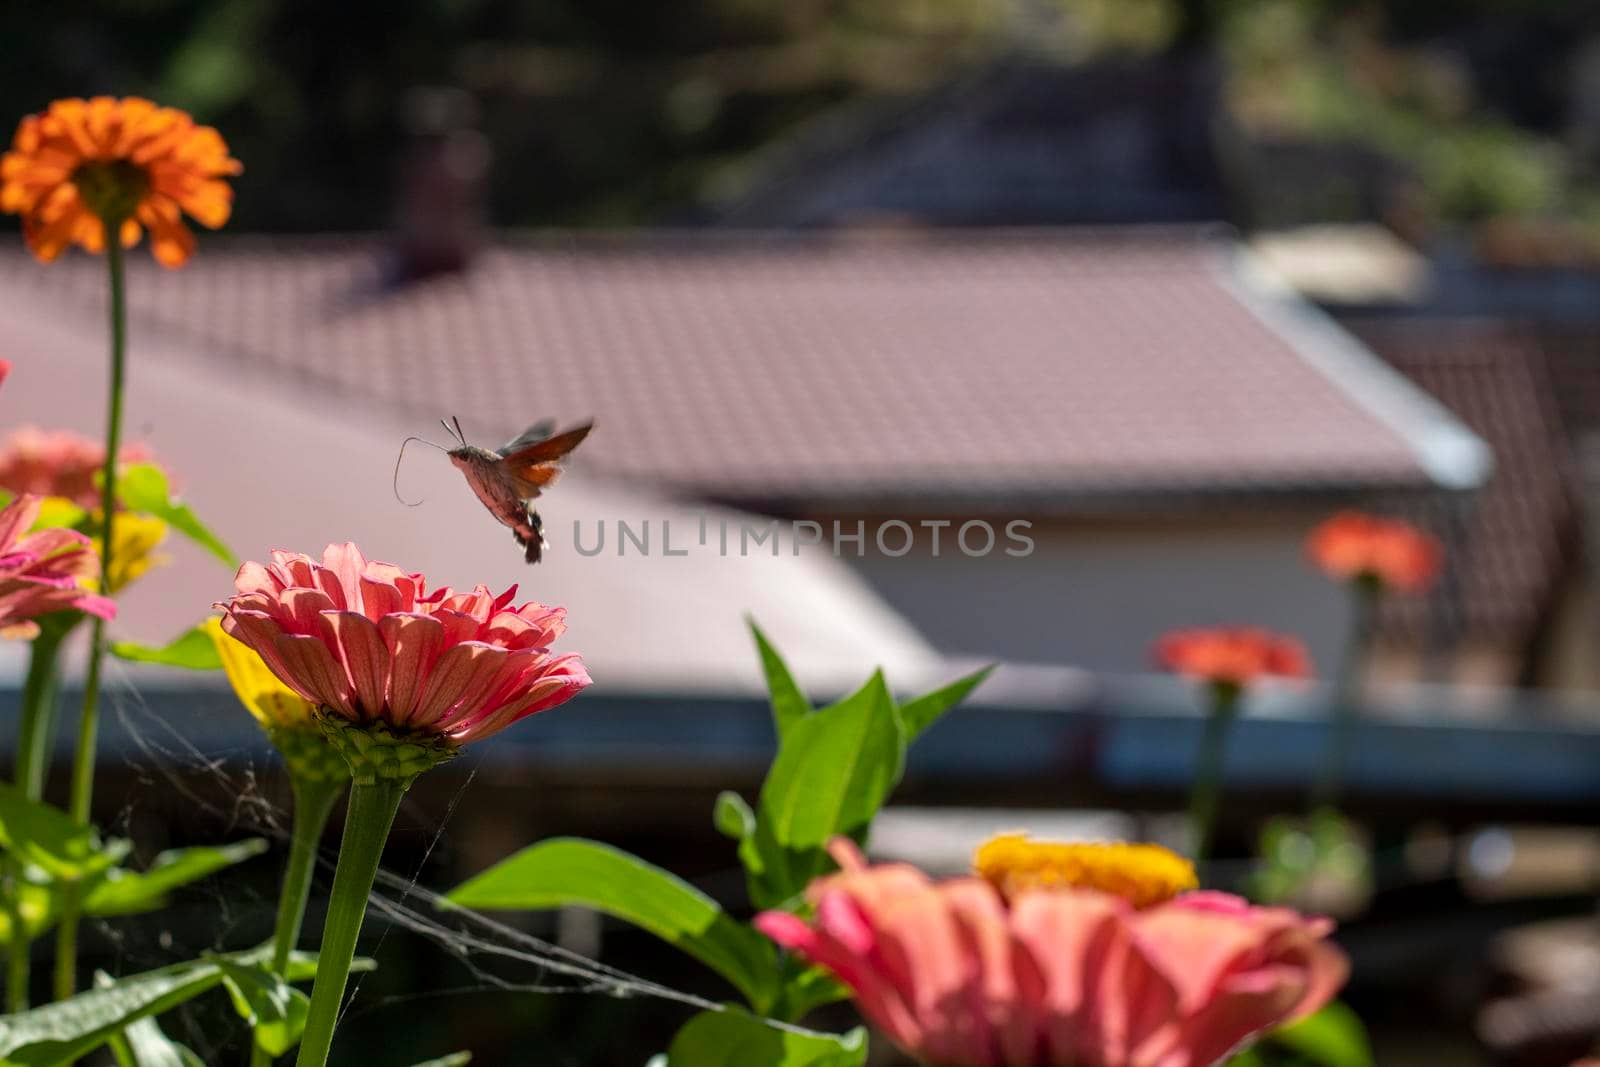 A pollinator taking flight from the autumn flowers by bybyphotography